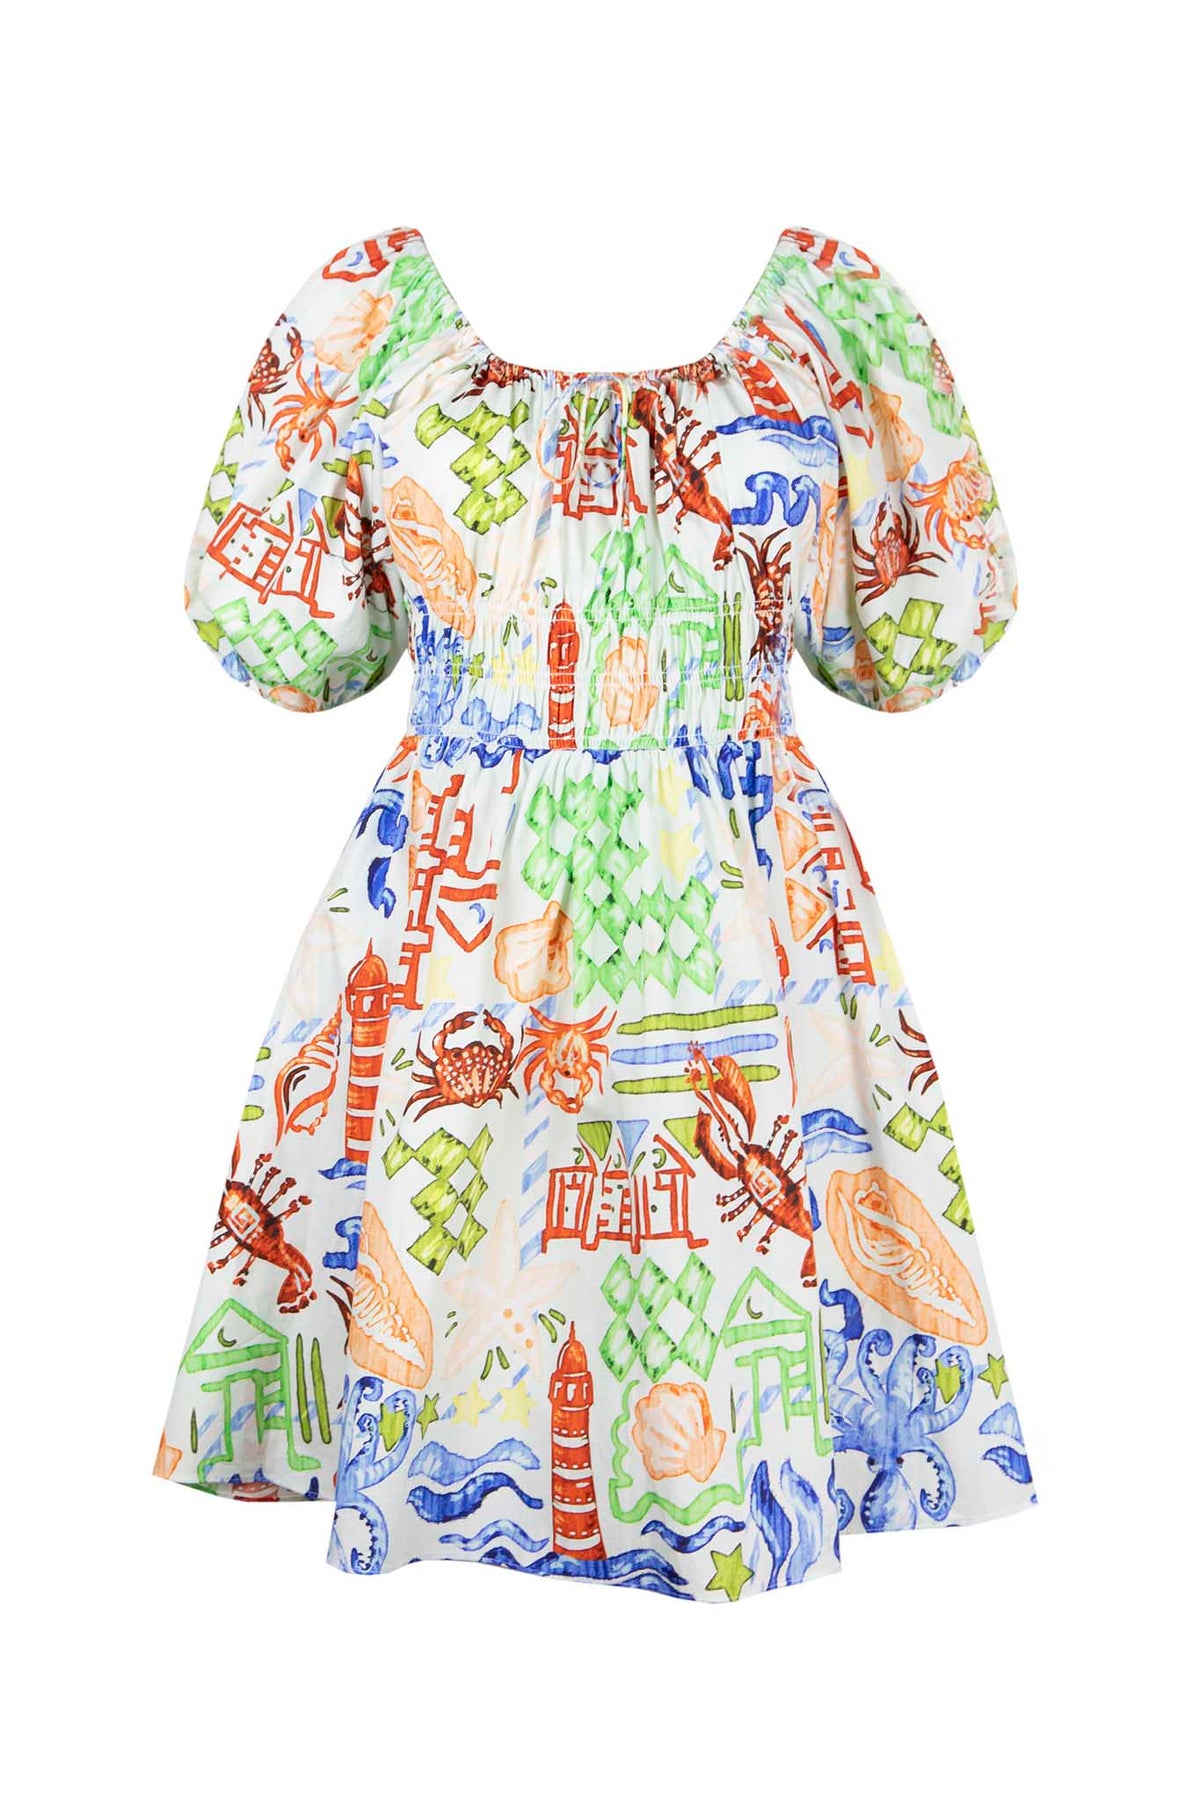 The Drew dress has a scoop neck with a drawstring tie, a smocked waist and a shirred mini skirt.